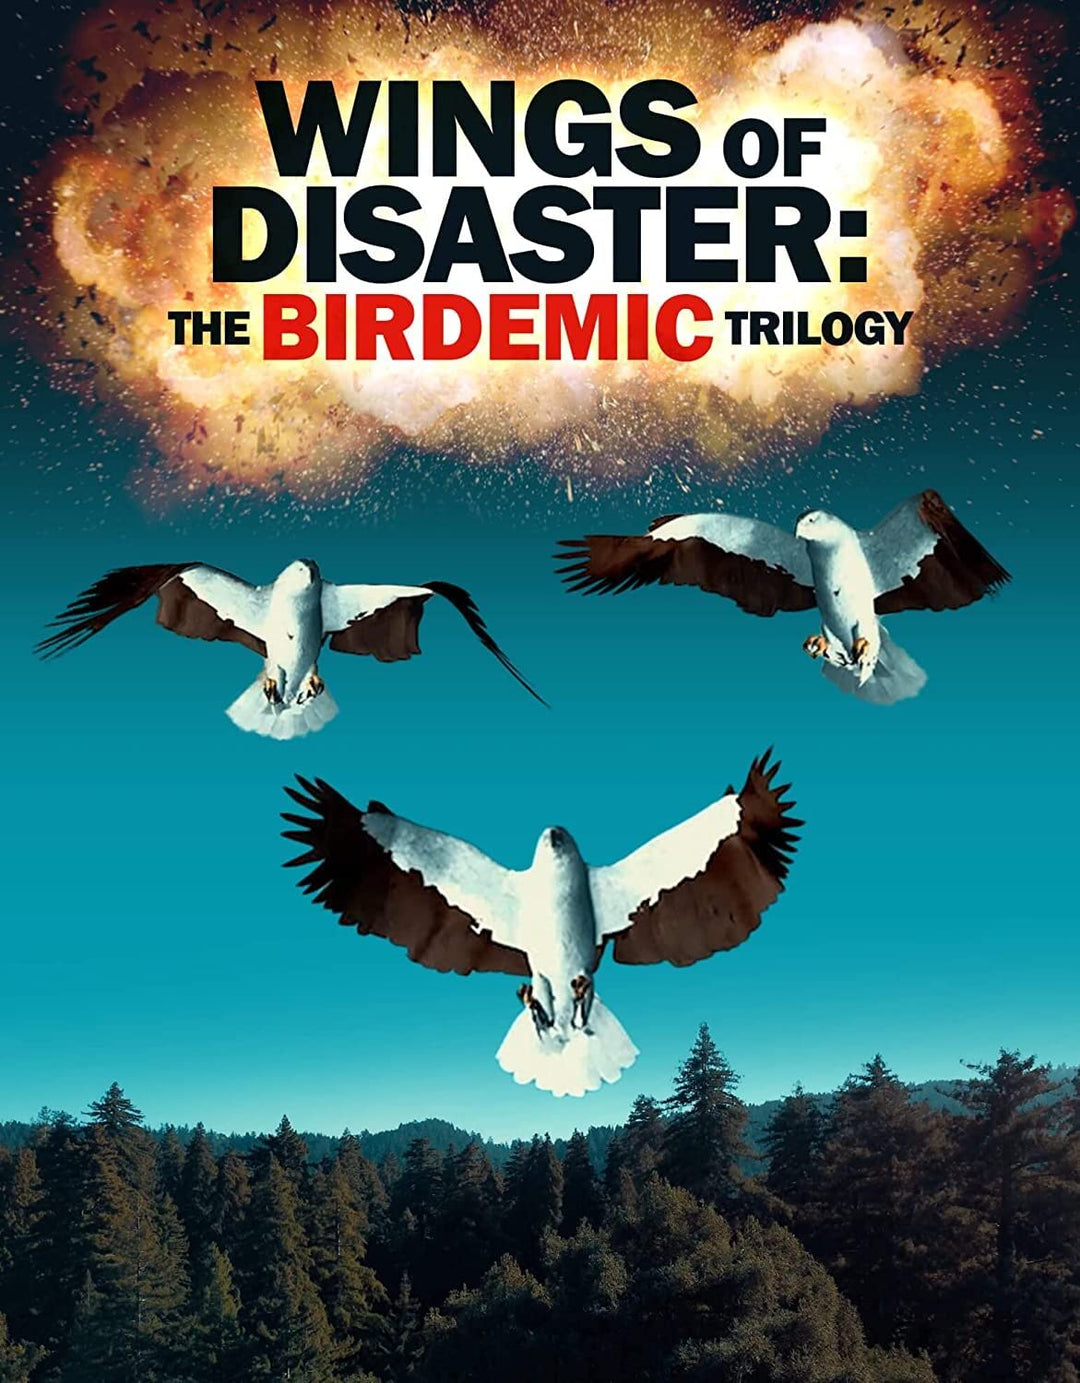 THE BIRDEMIC TRILOGY TAKES FLIGHT WITH LATE NIGHT CABLE'S SEXIEST HITS